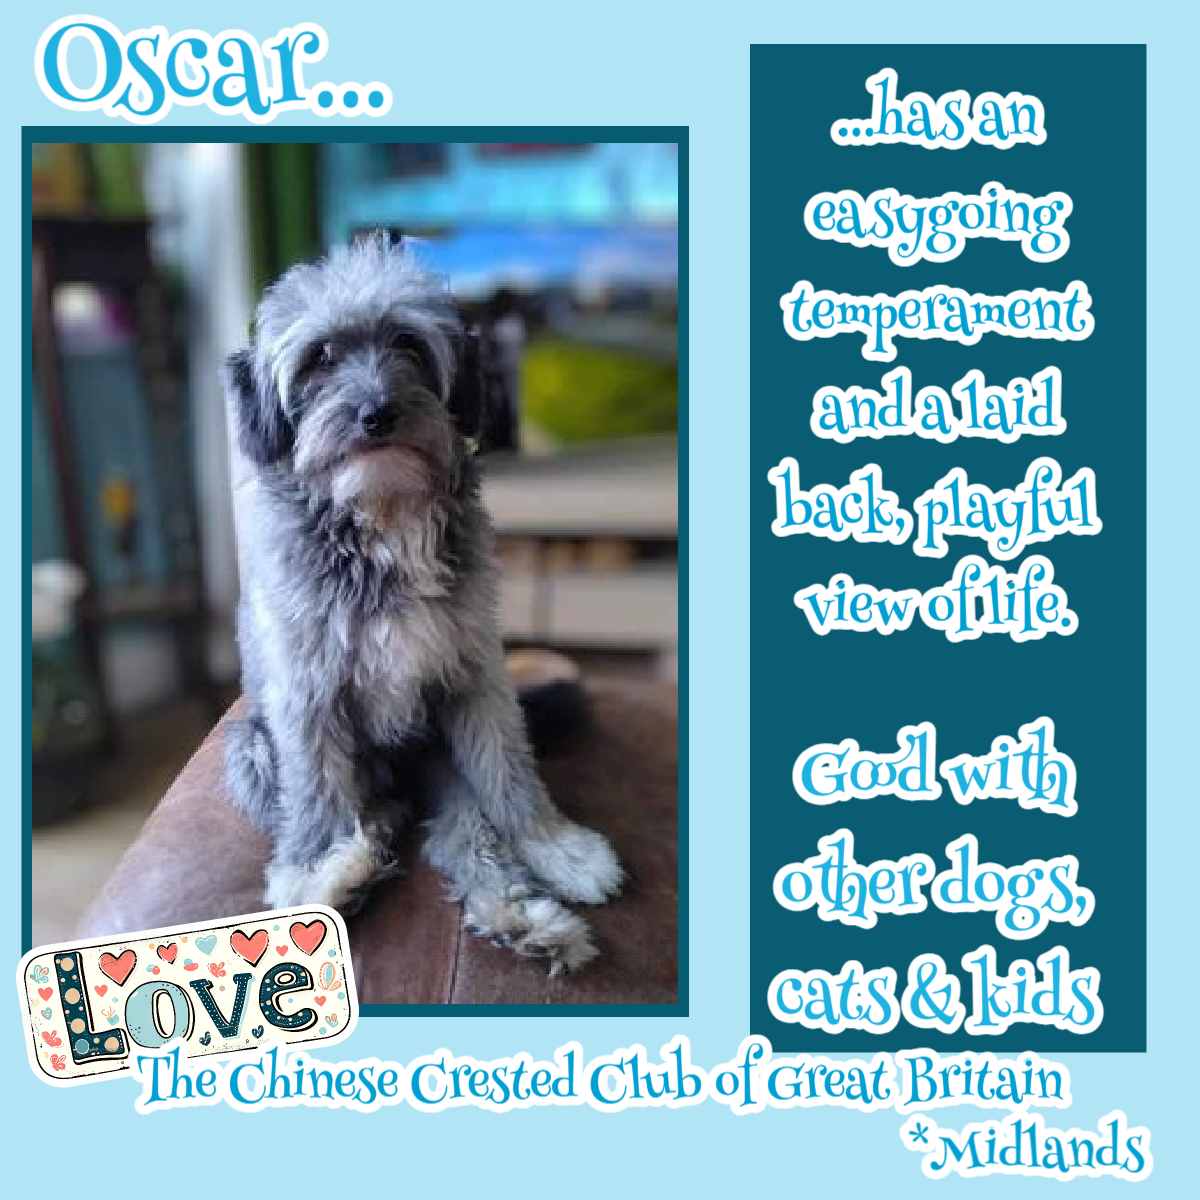 #k9hour 1yo OSCAR has an easy going temperament & a laid back view of life. This lovely Powderpuff Crestie has overcome his initial fears & is enjoying his life as you would expect a young dog to do. He makes the most of every day & gets on well with his fellow roomies. For more…